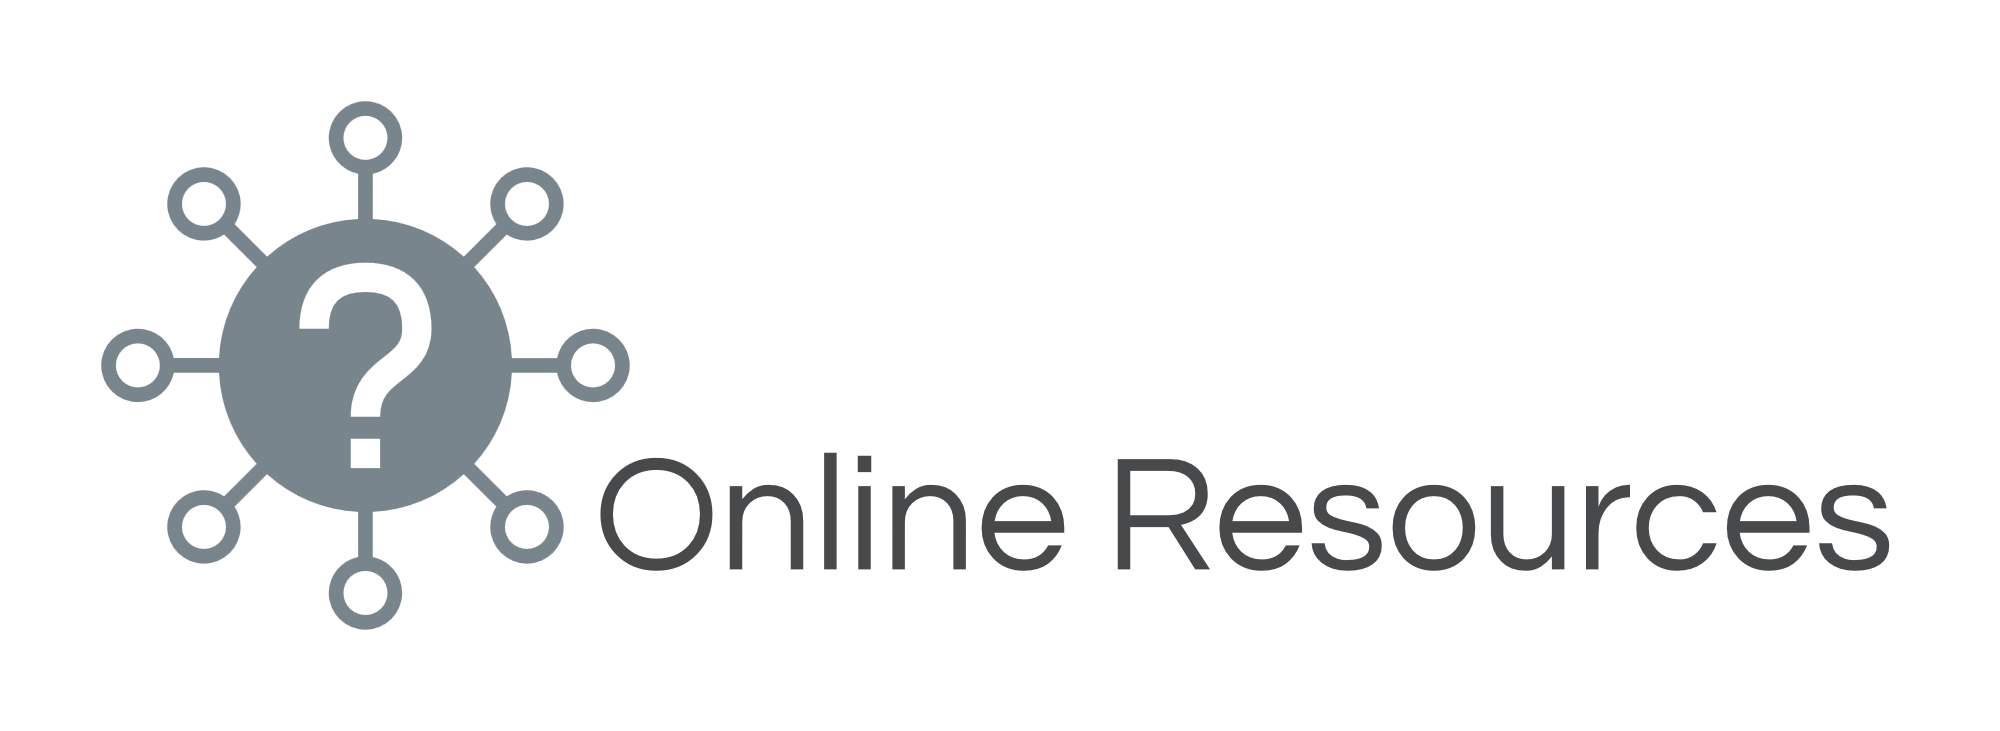 Online Resources-logo(1).png